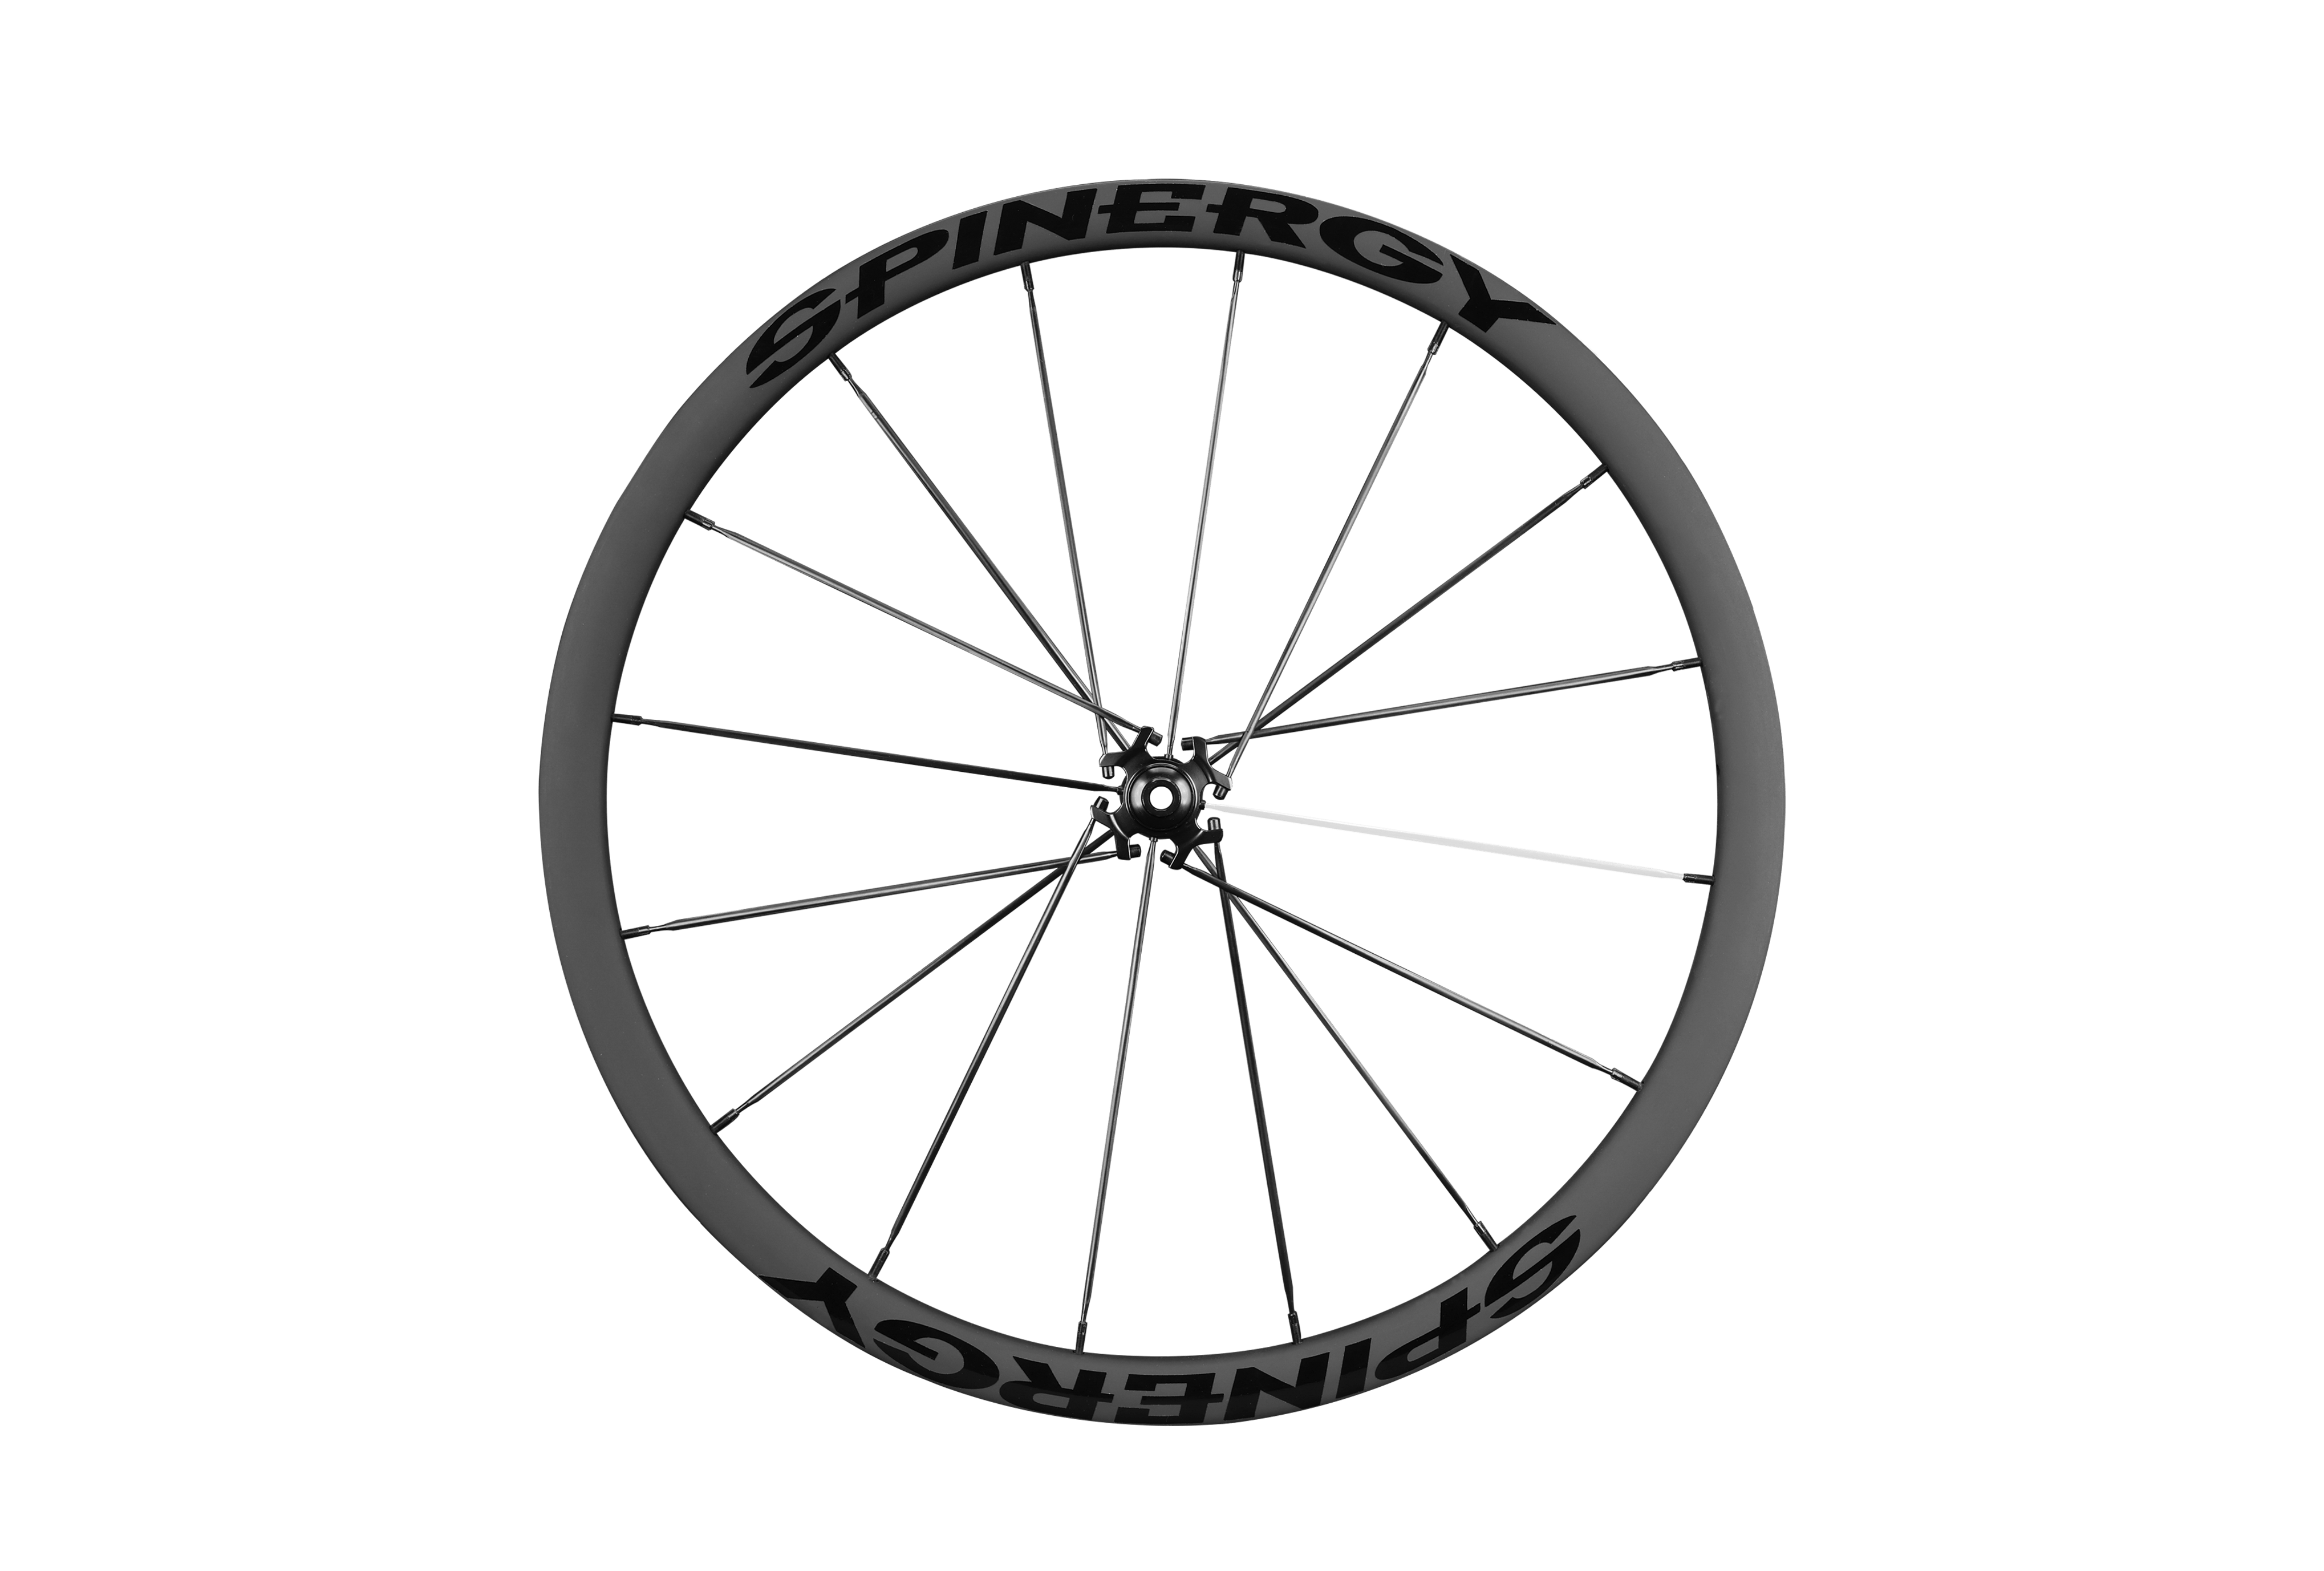 Road Bike Wheels: Built for Speed and Comfort – Spinergy